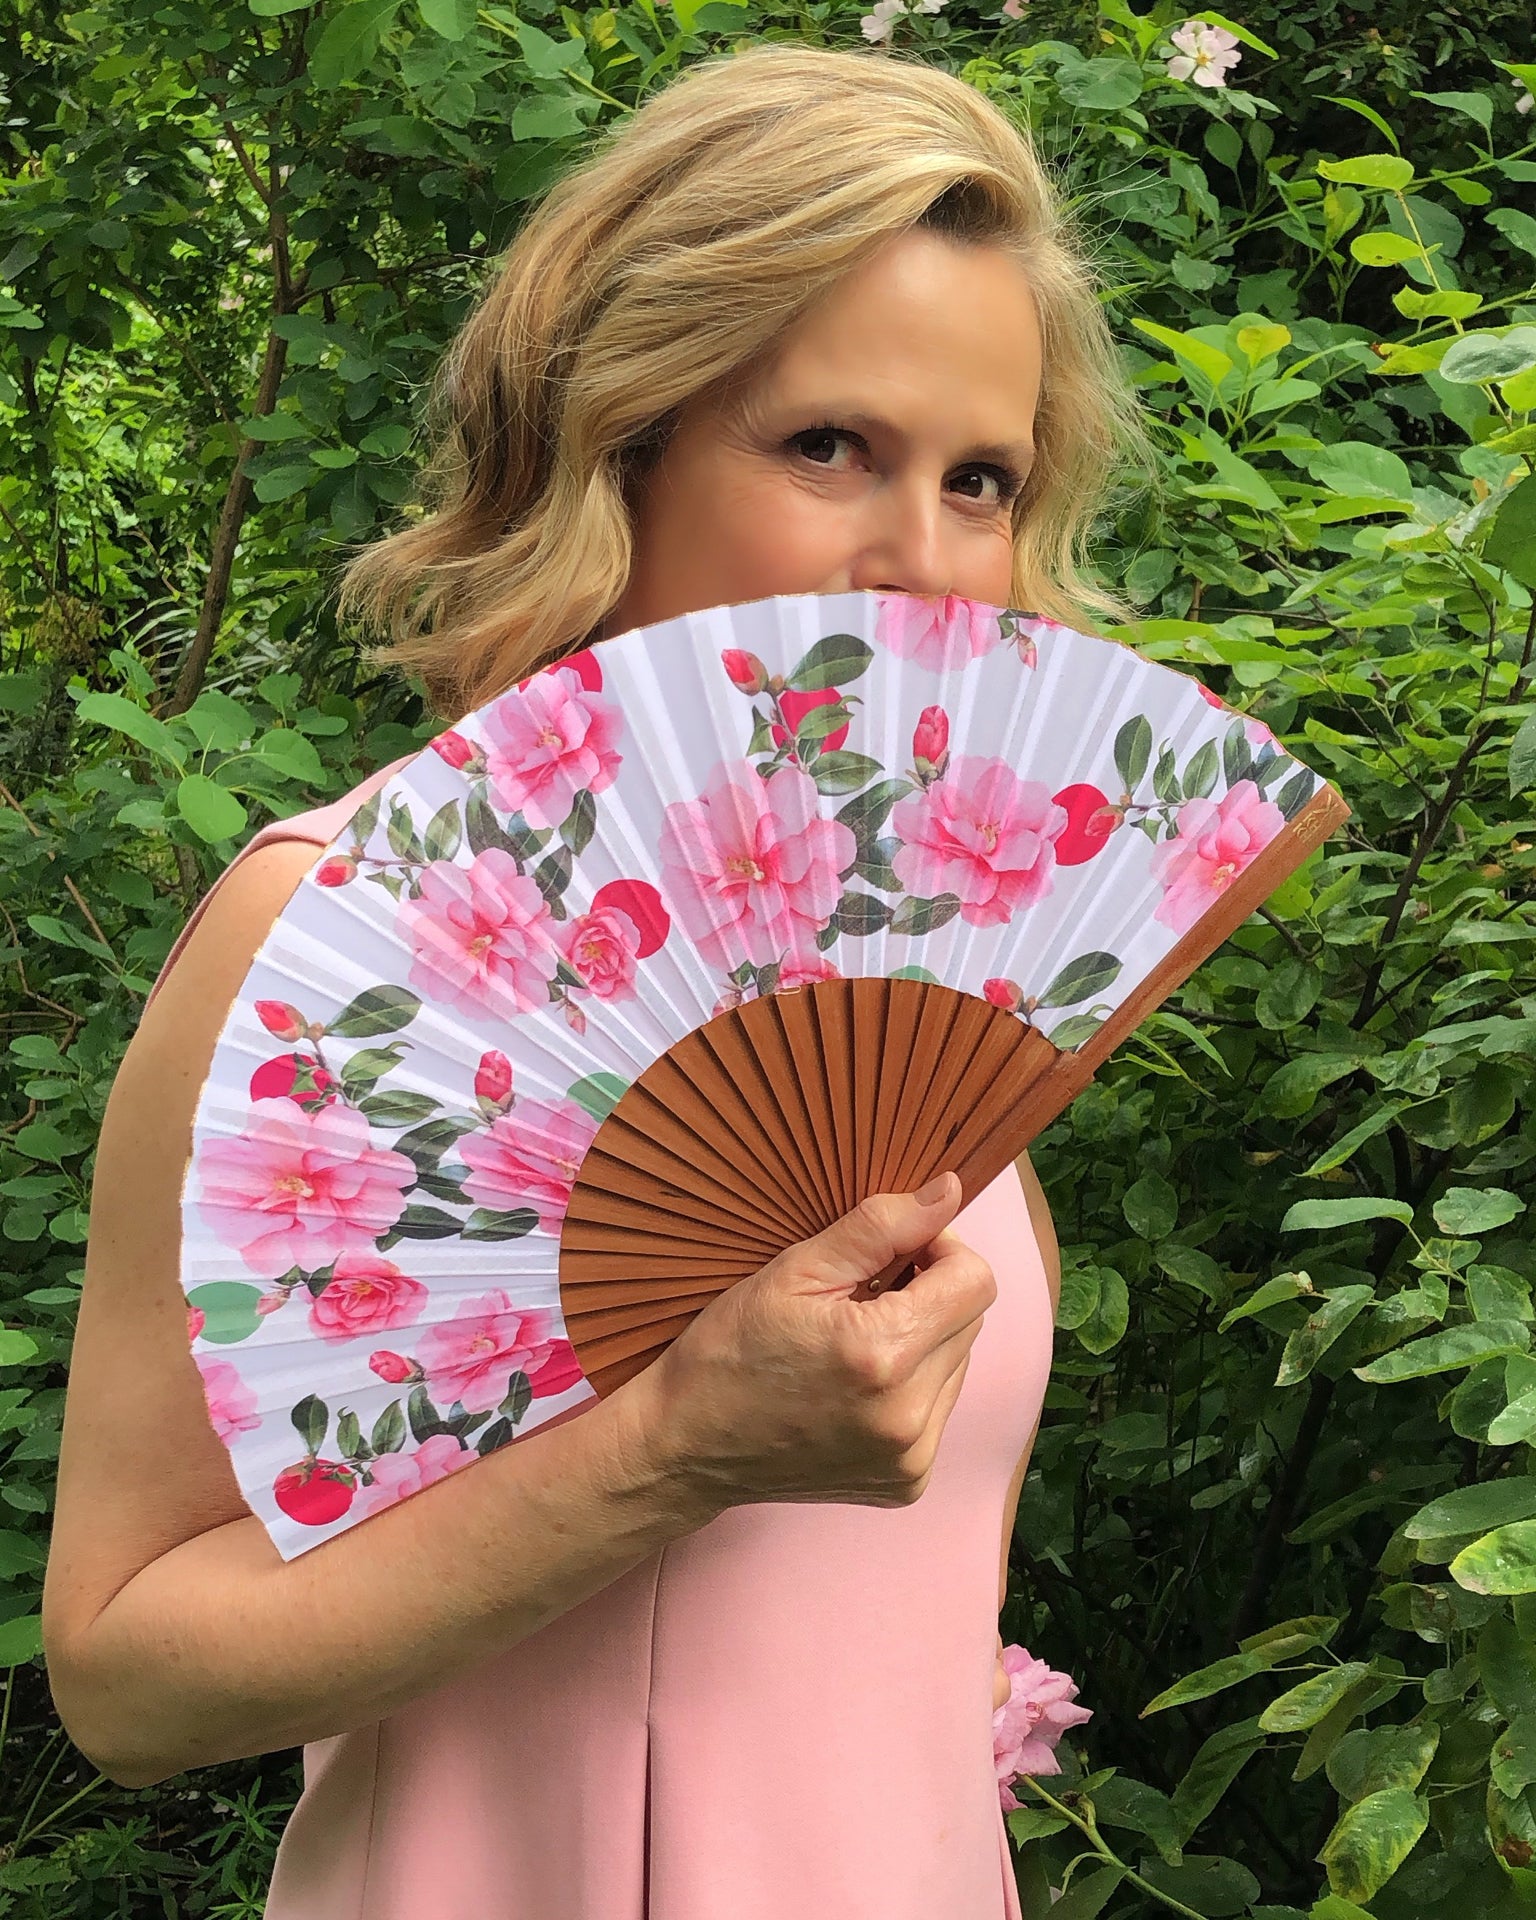 Liz Earle holding Khu Khu X Liz Earle Beautiful Cool Camellias Hand-Fan with collaboration print (Floral with pink and green spots and camellias.)